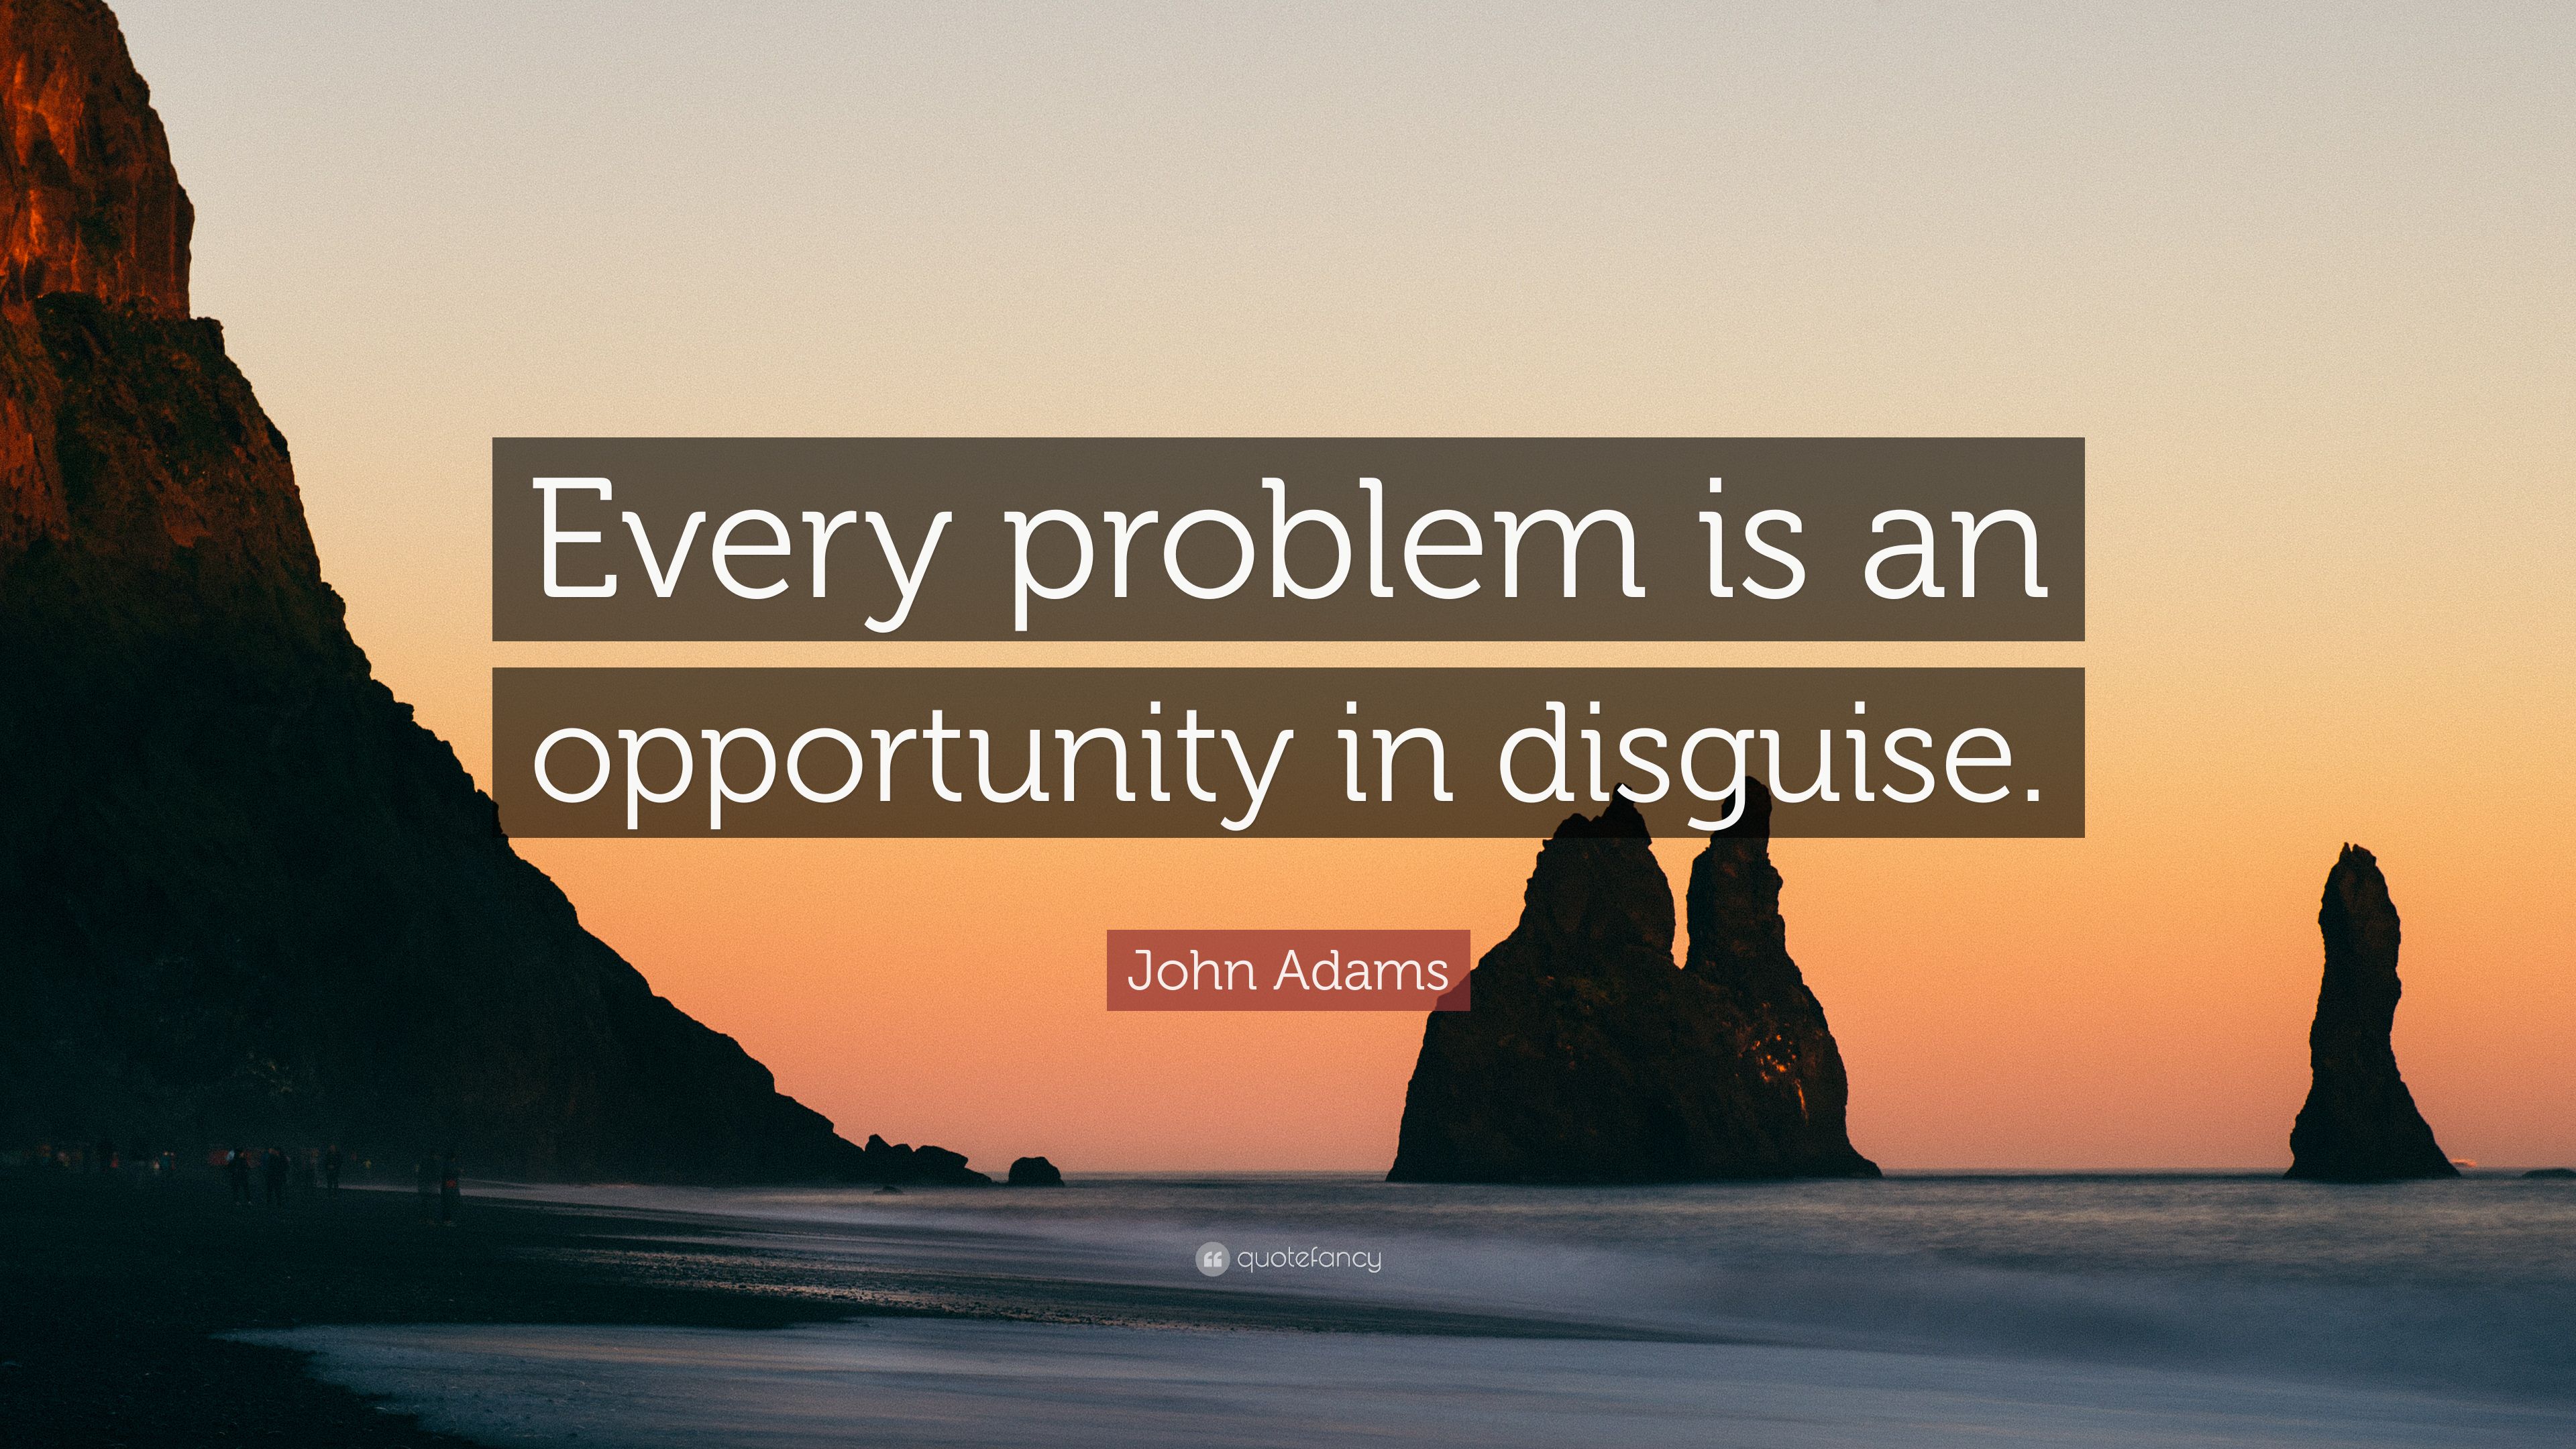 John Adams Quote: “Every problem is an .quotefancy.com